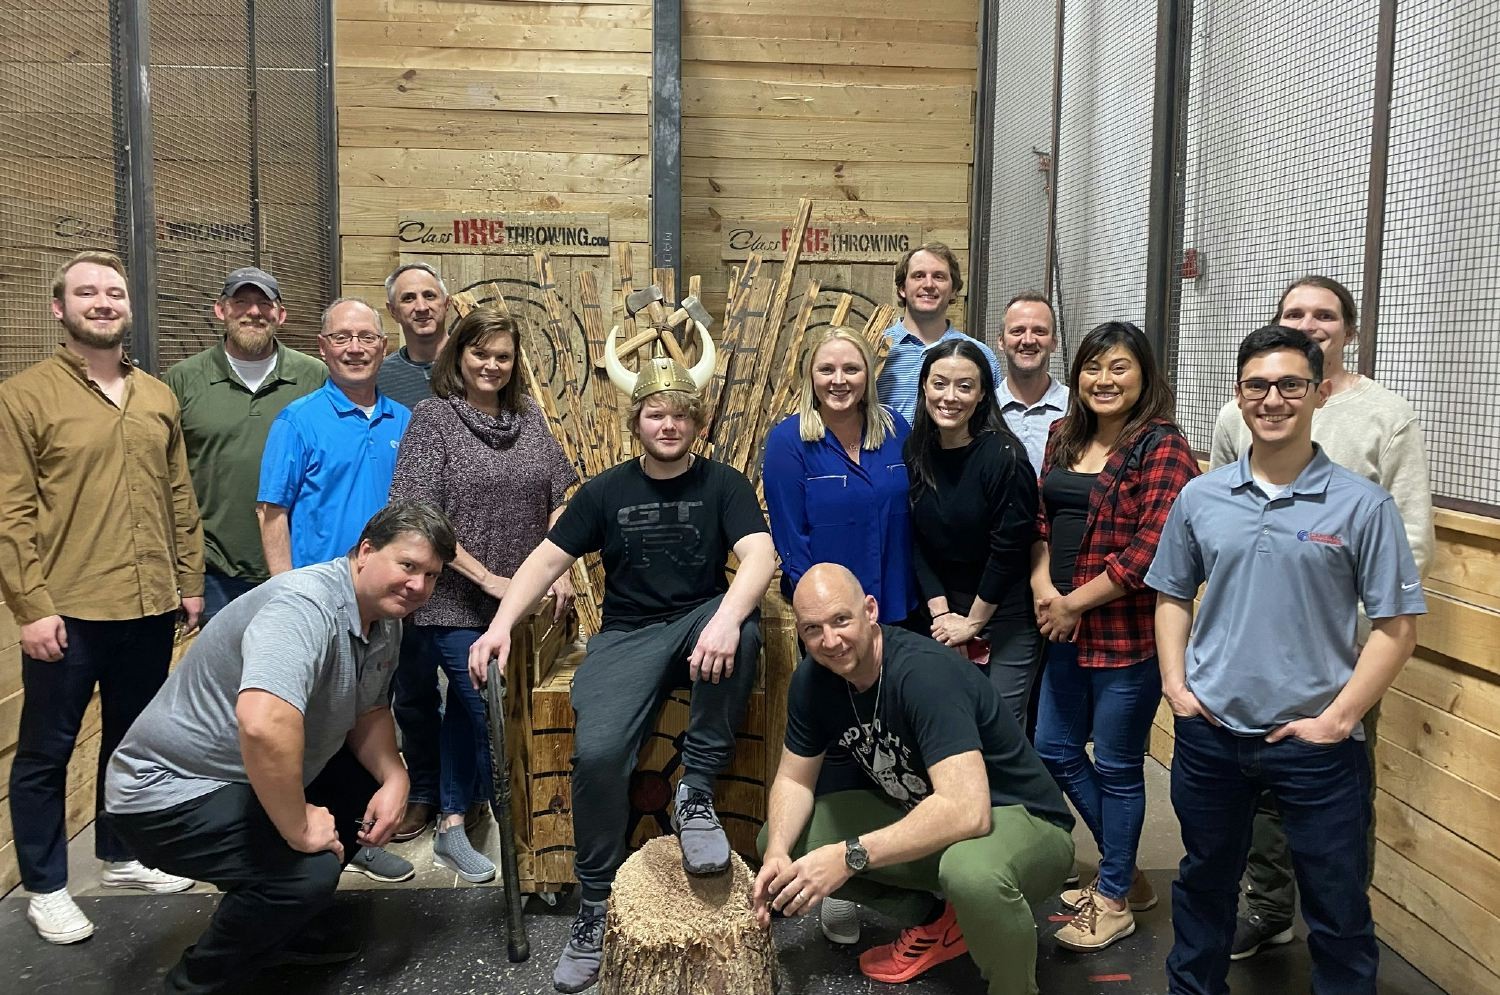 Company Axe Throwing event